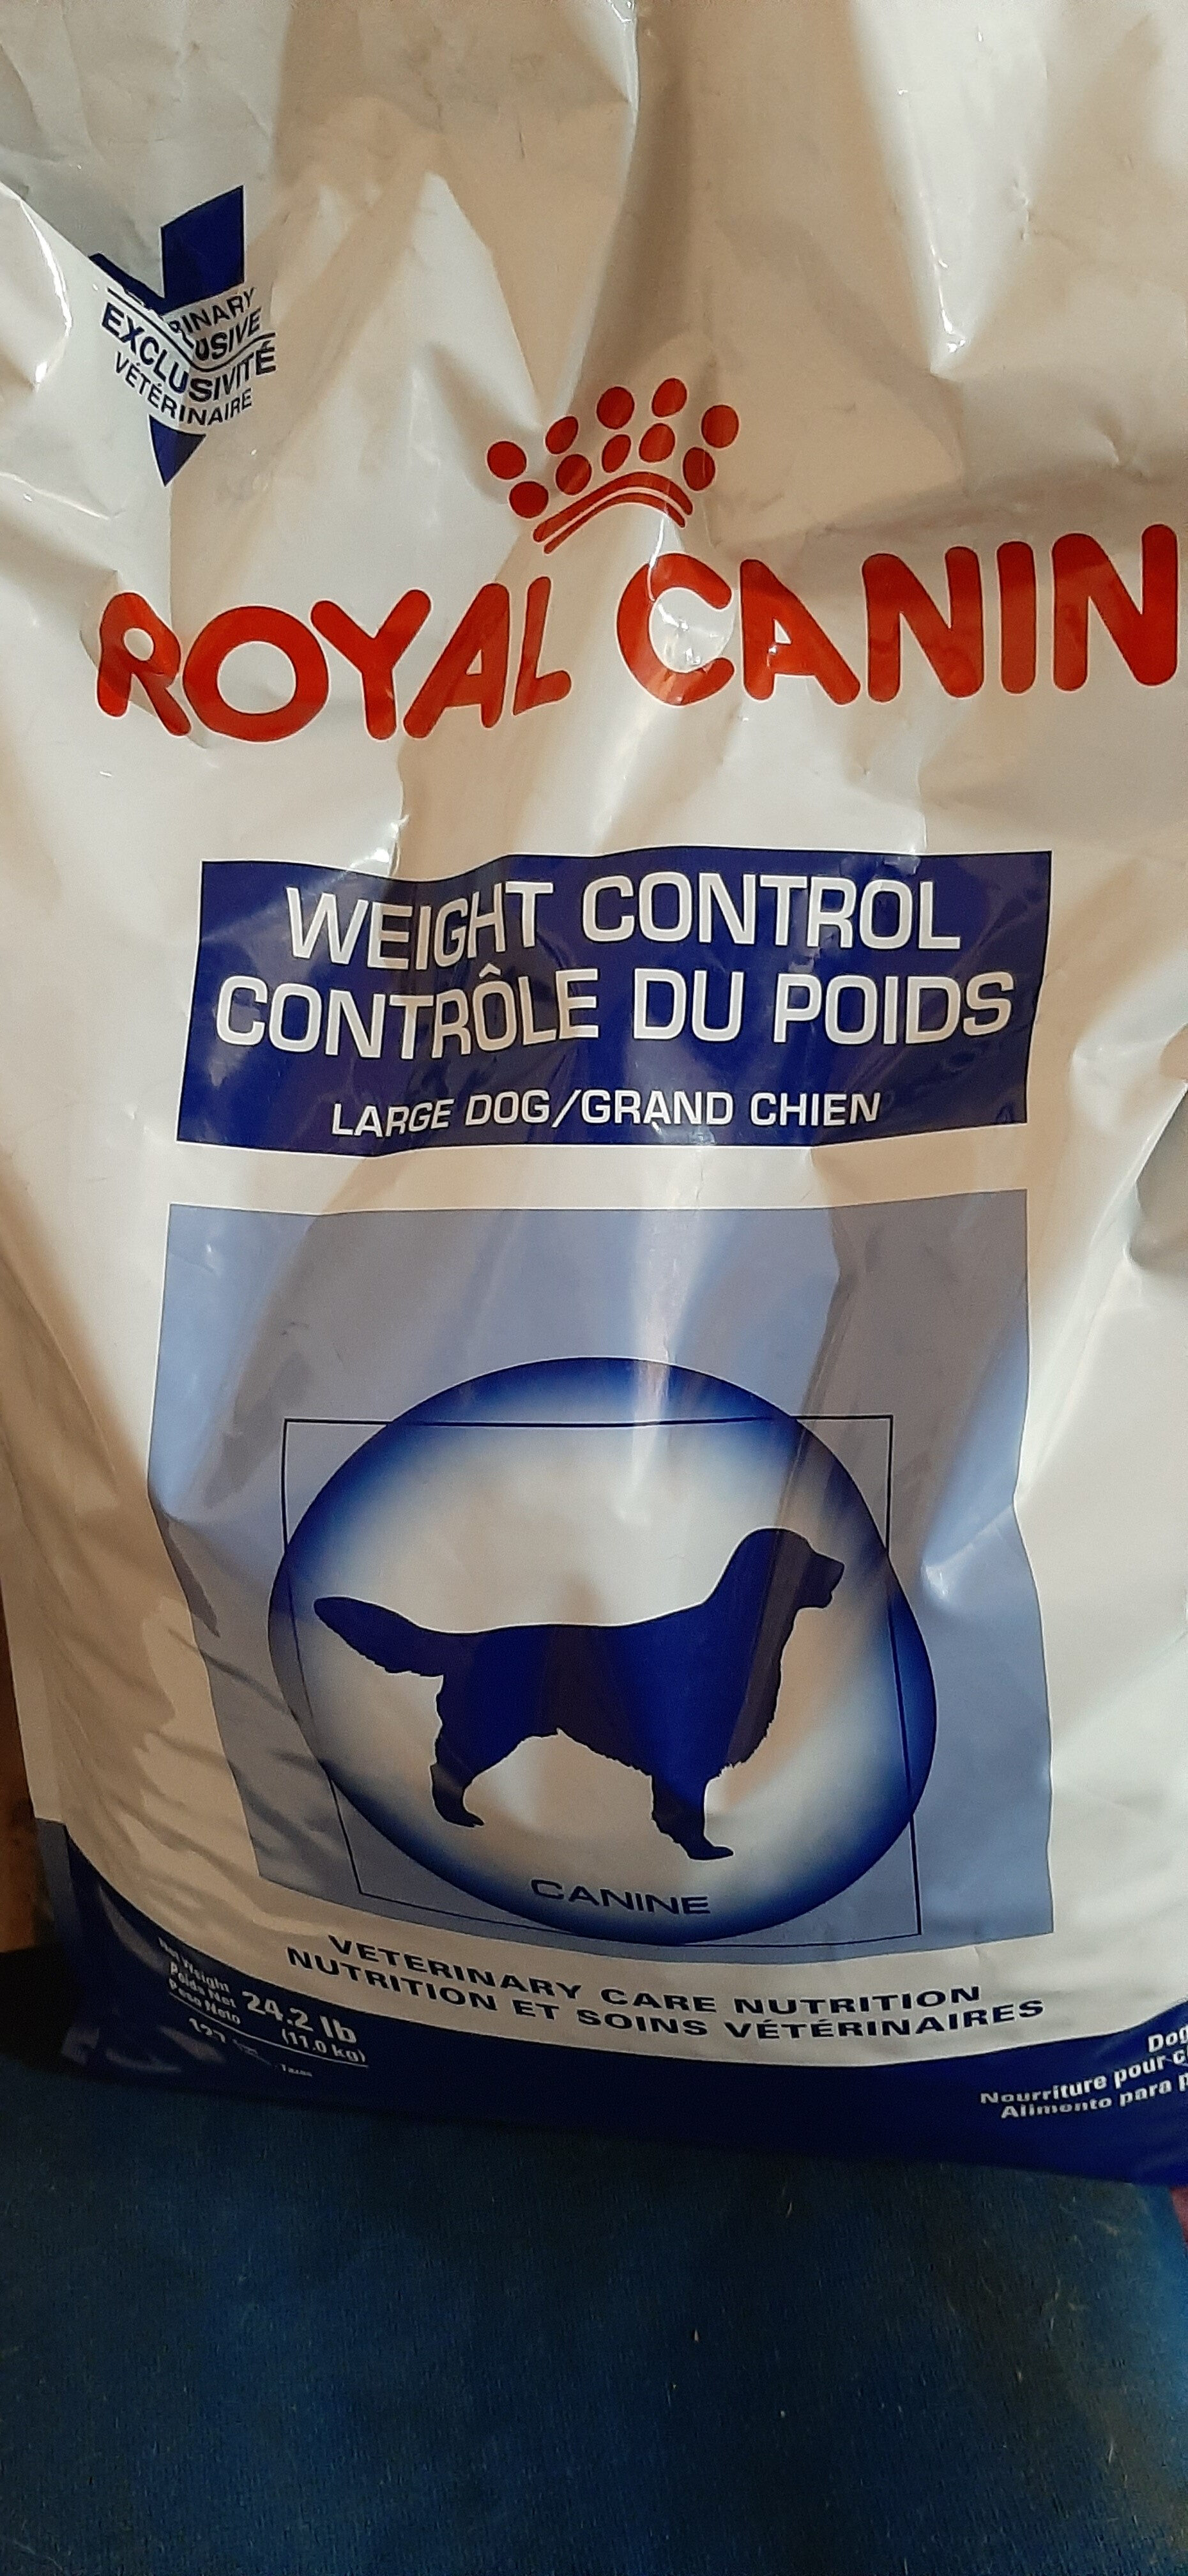 Cargando…royal canin Weight control - Product - es